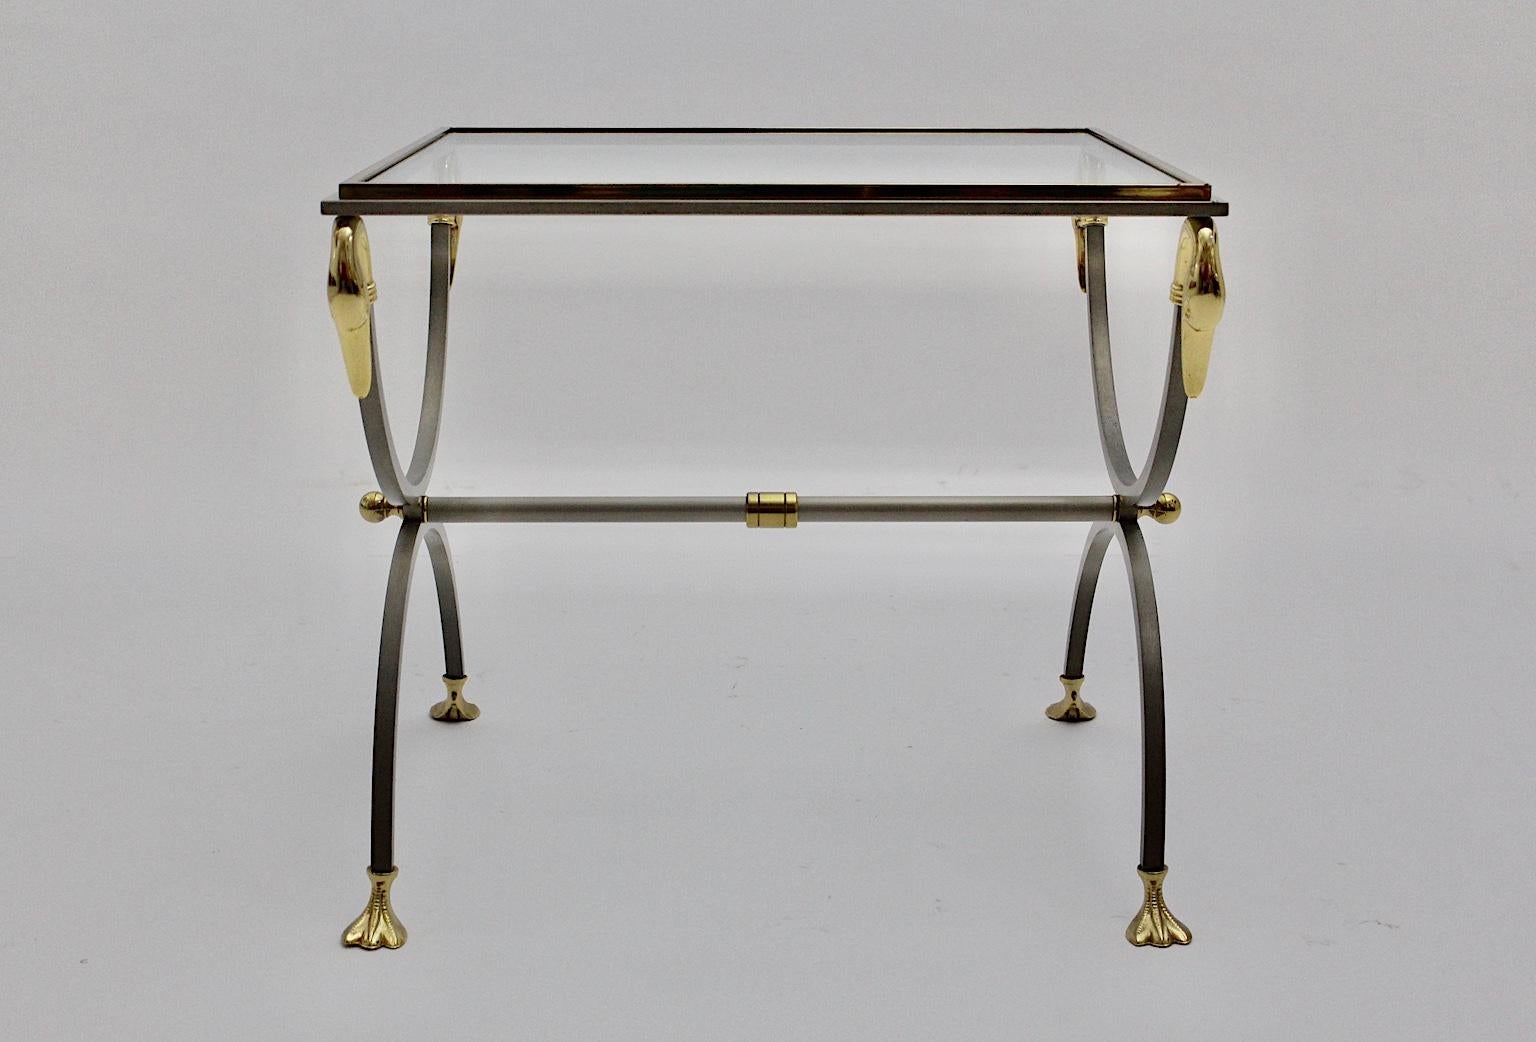 Maison Jansen Vintage Gold Stainless Steel Coffee Table circa 1970 France For Sale 2